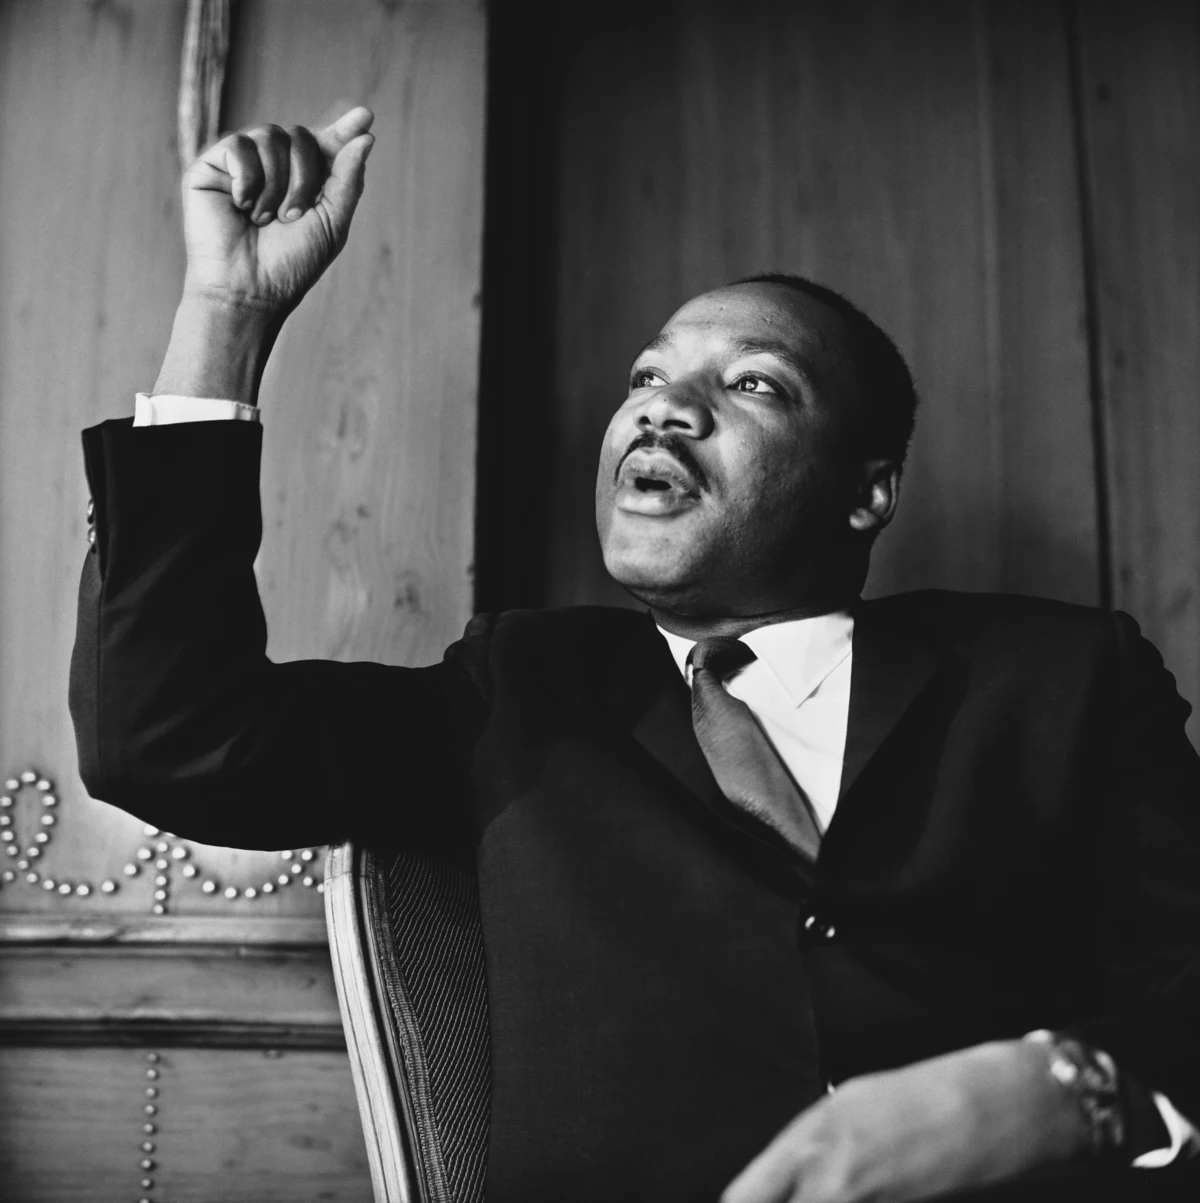 Remembering Dr Martin Luther King Jr On His 88th Birthday